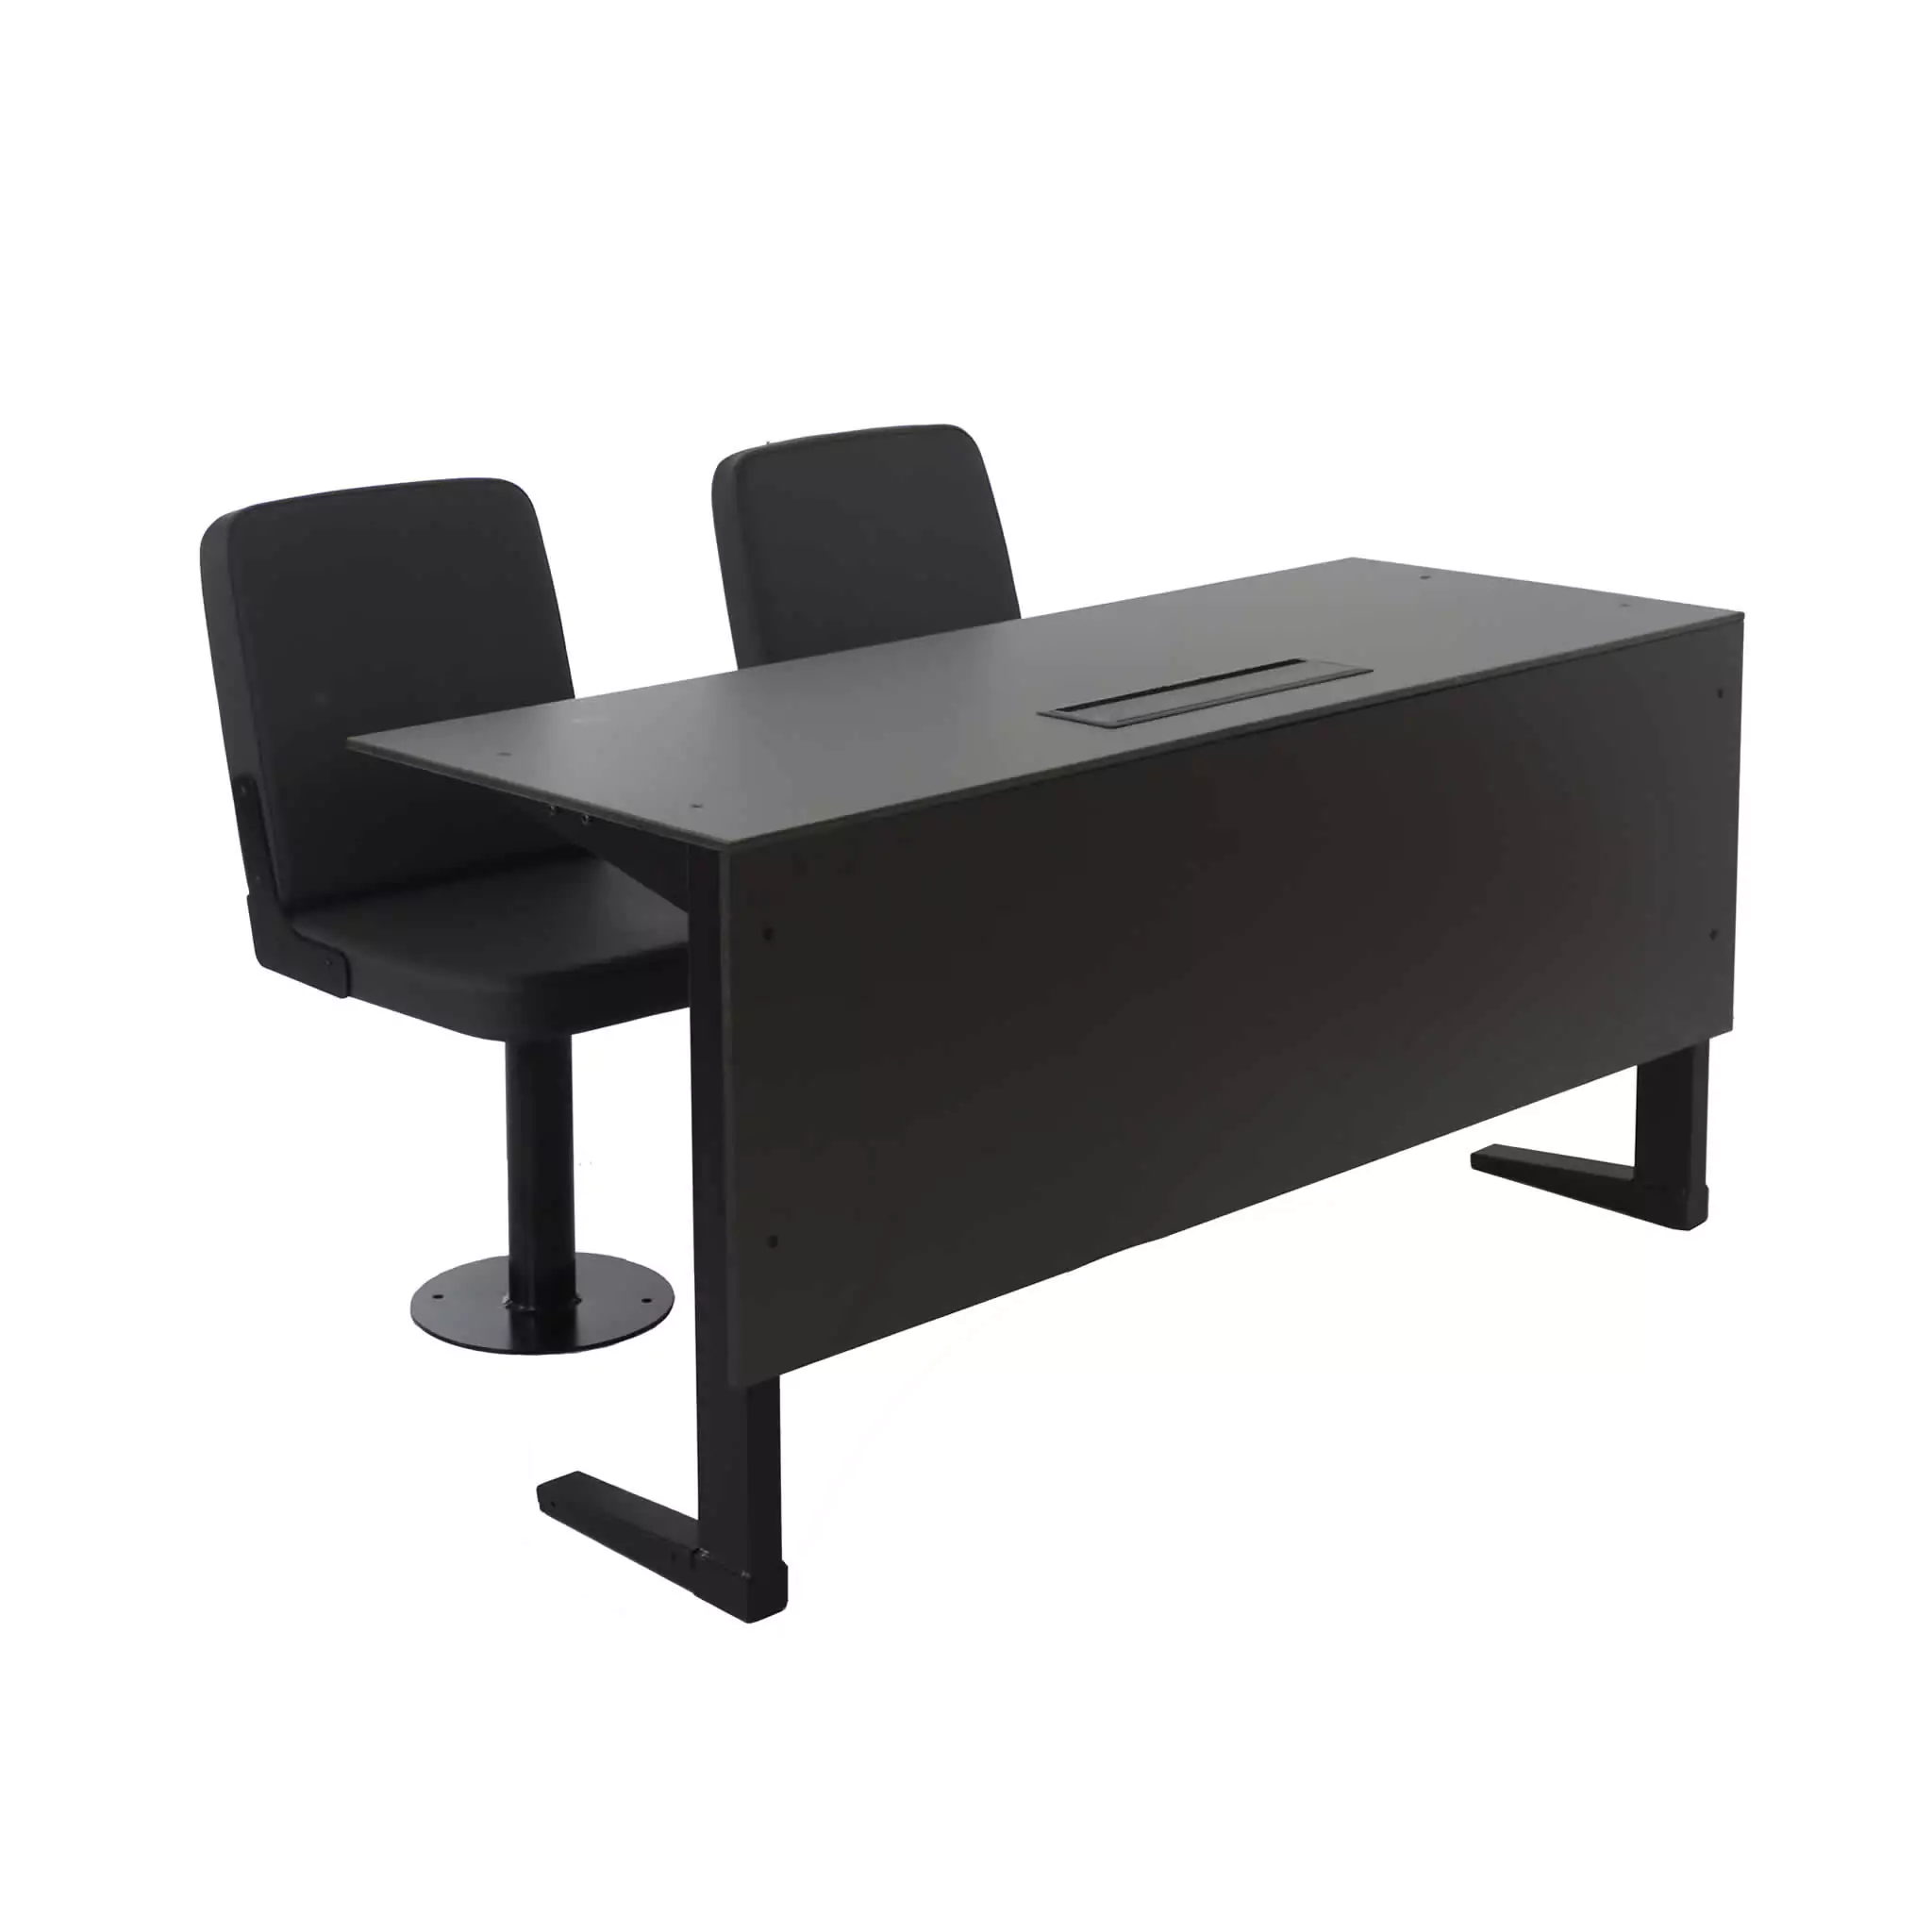 Simko Seating Product Press Table 01